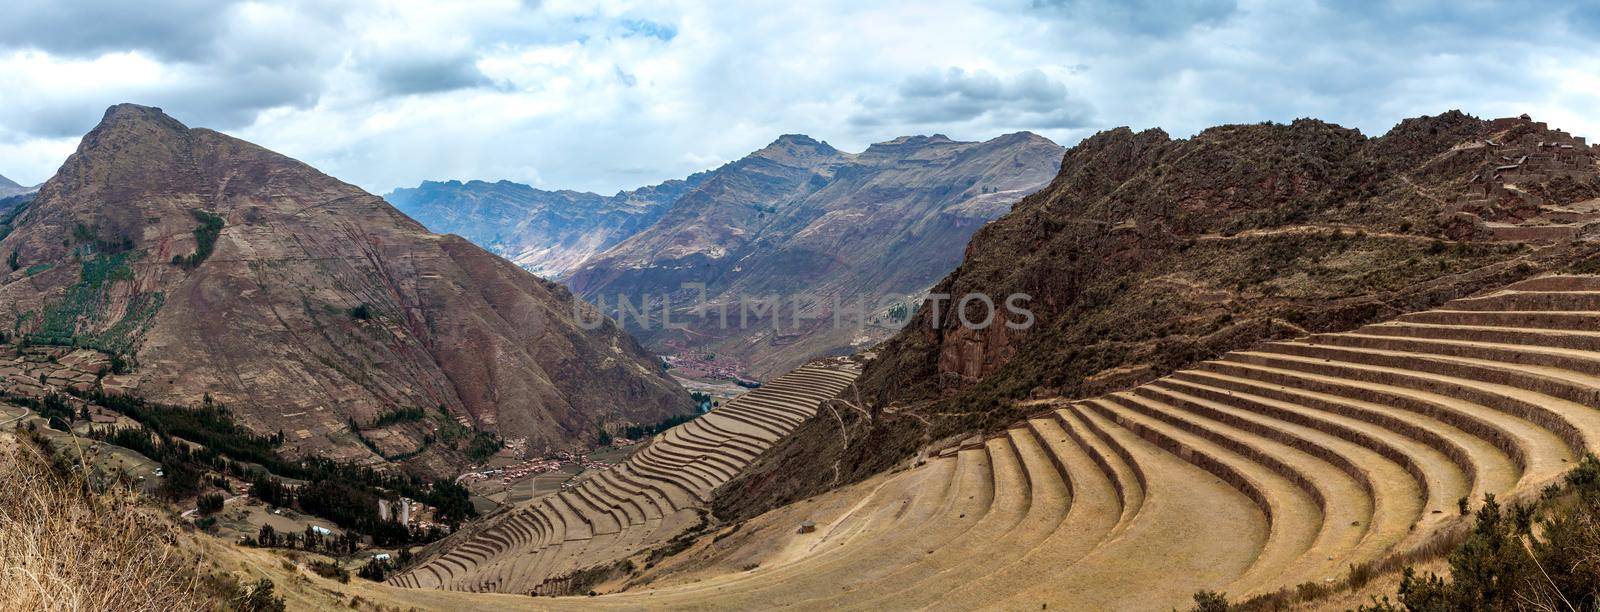 Panorama of aged agricultural terraces at the Incan ruined fortress of Pisac, Peru